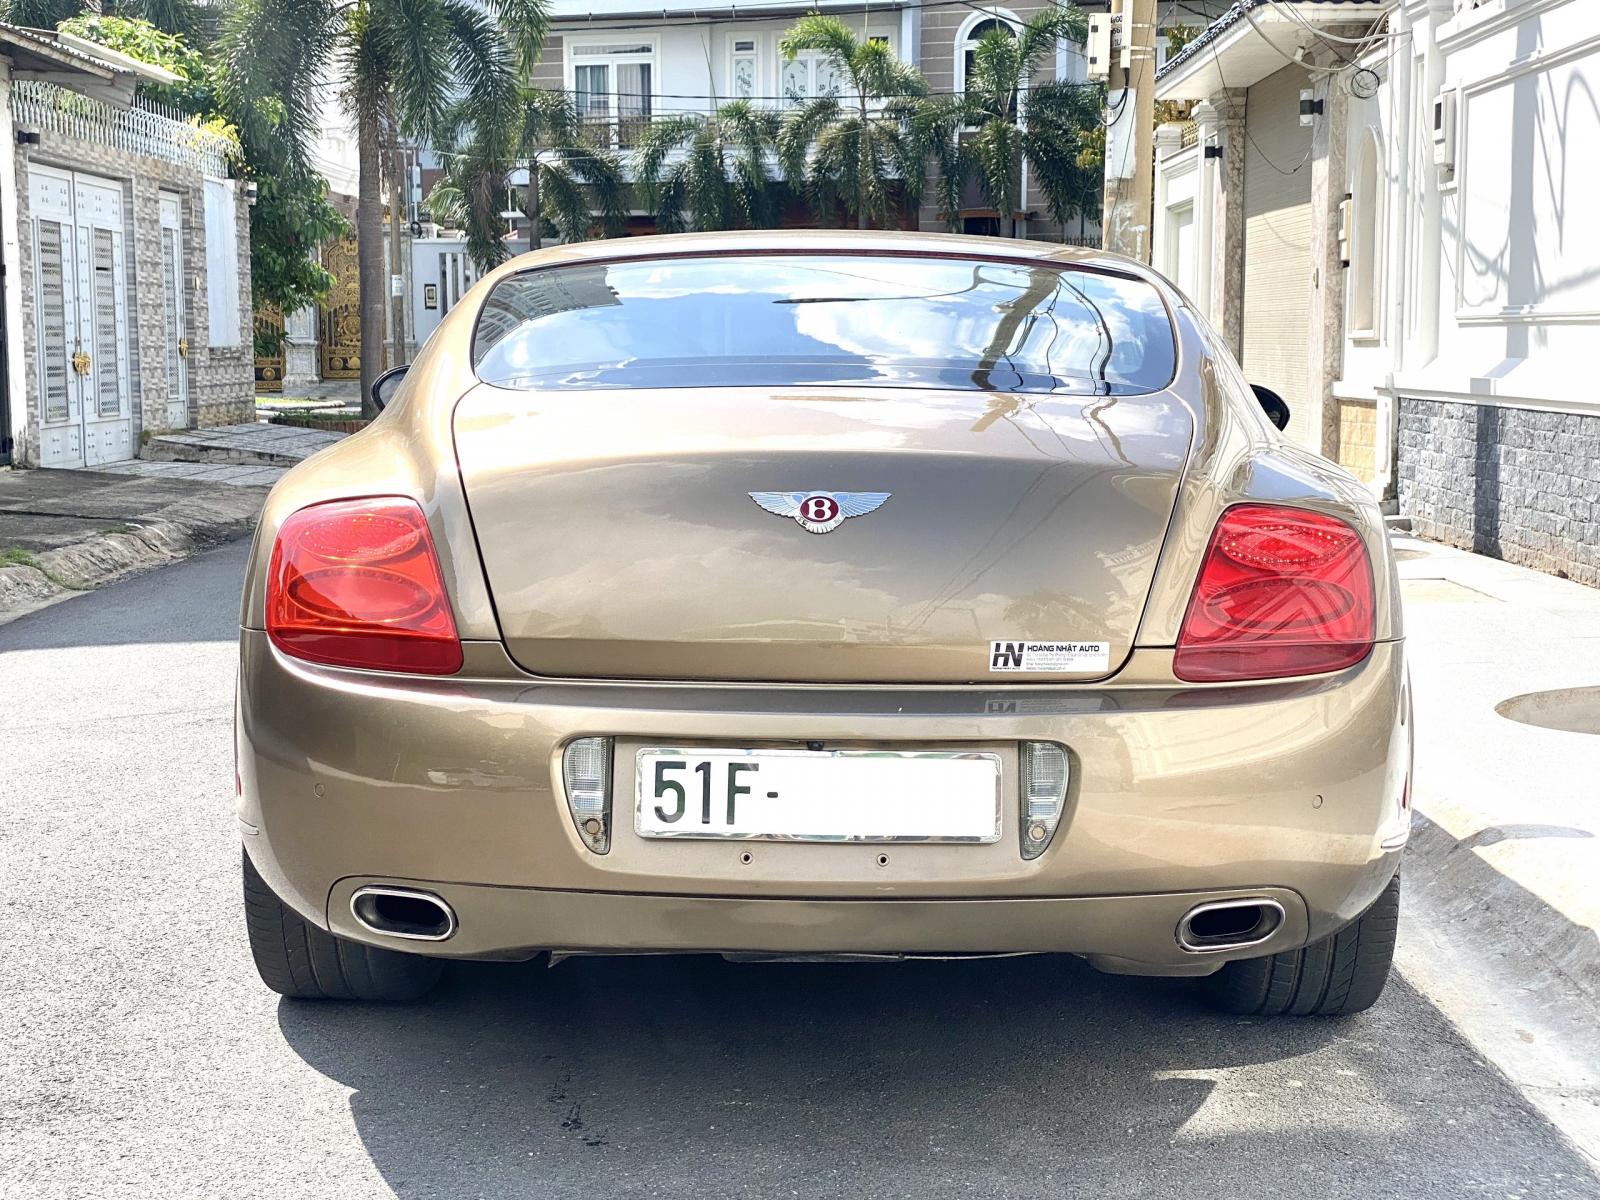 Bentley Continental GT Coupe 2004 - Hàng Độc Bentley Continental Coupe 2 cửa thể thao